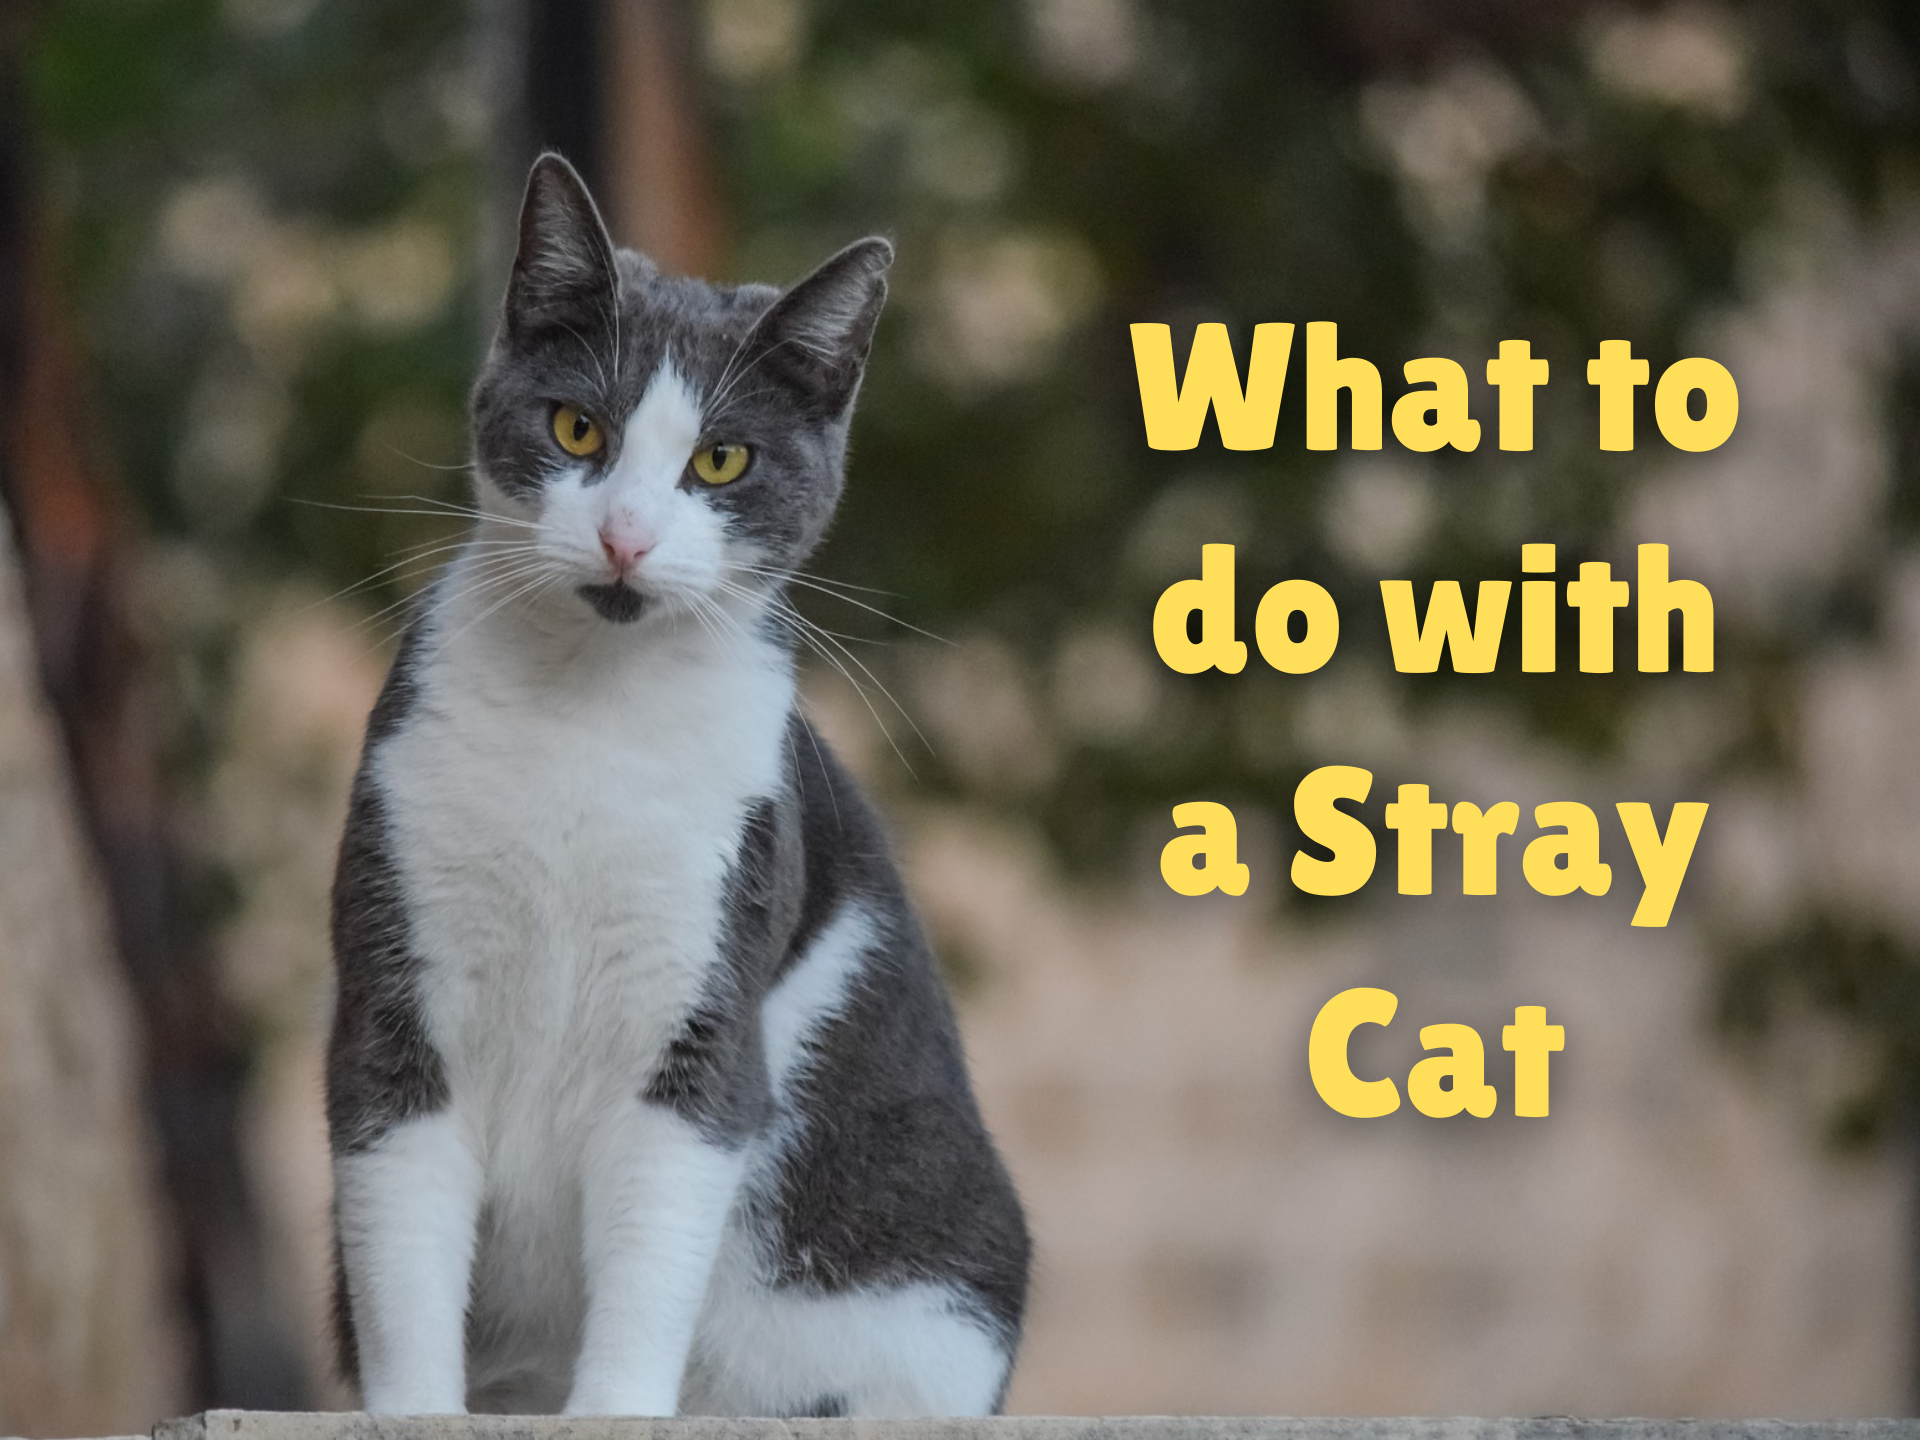 What to do with a Stray Cat